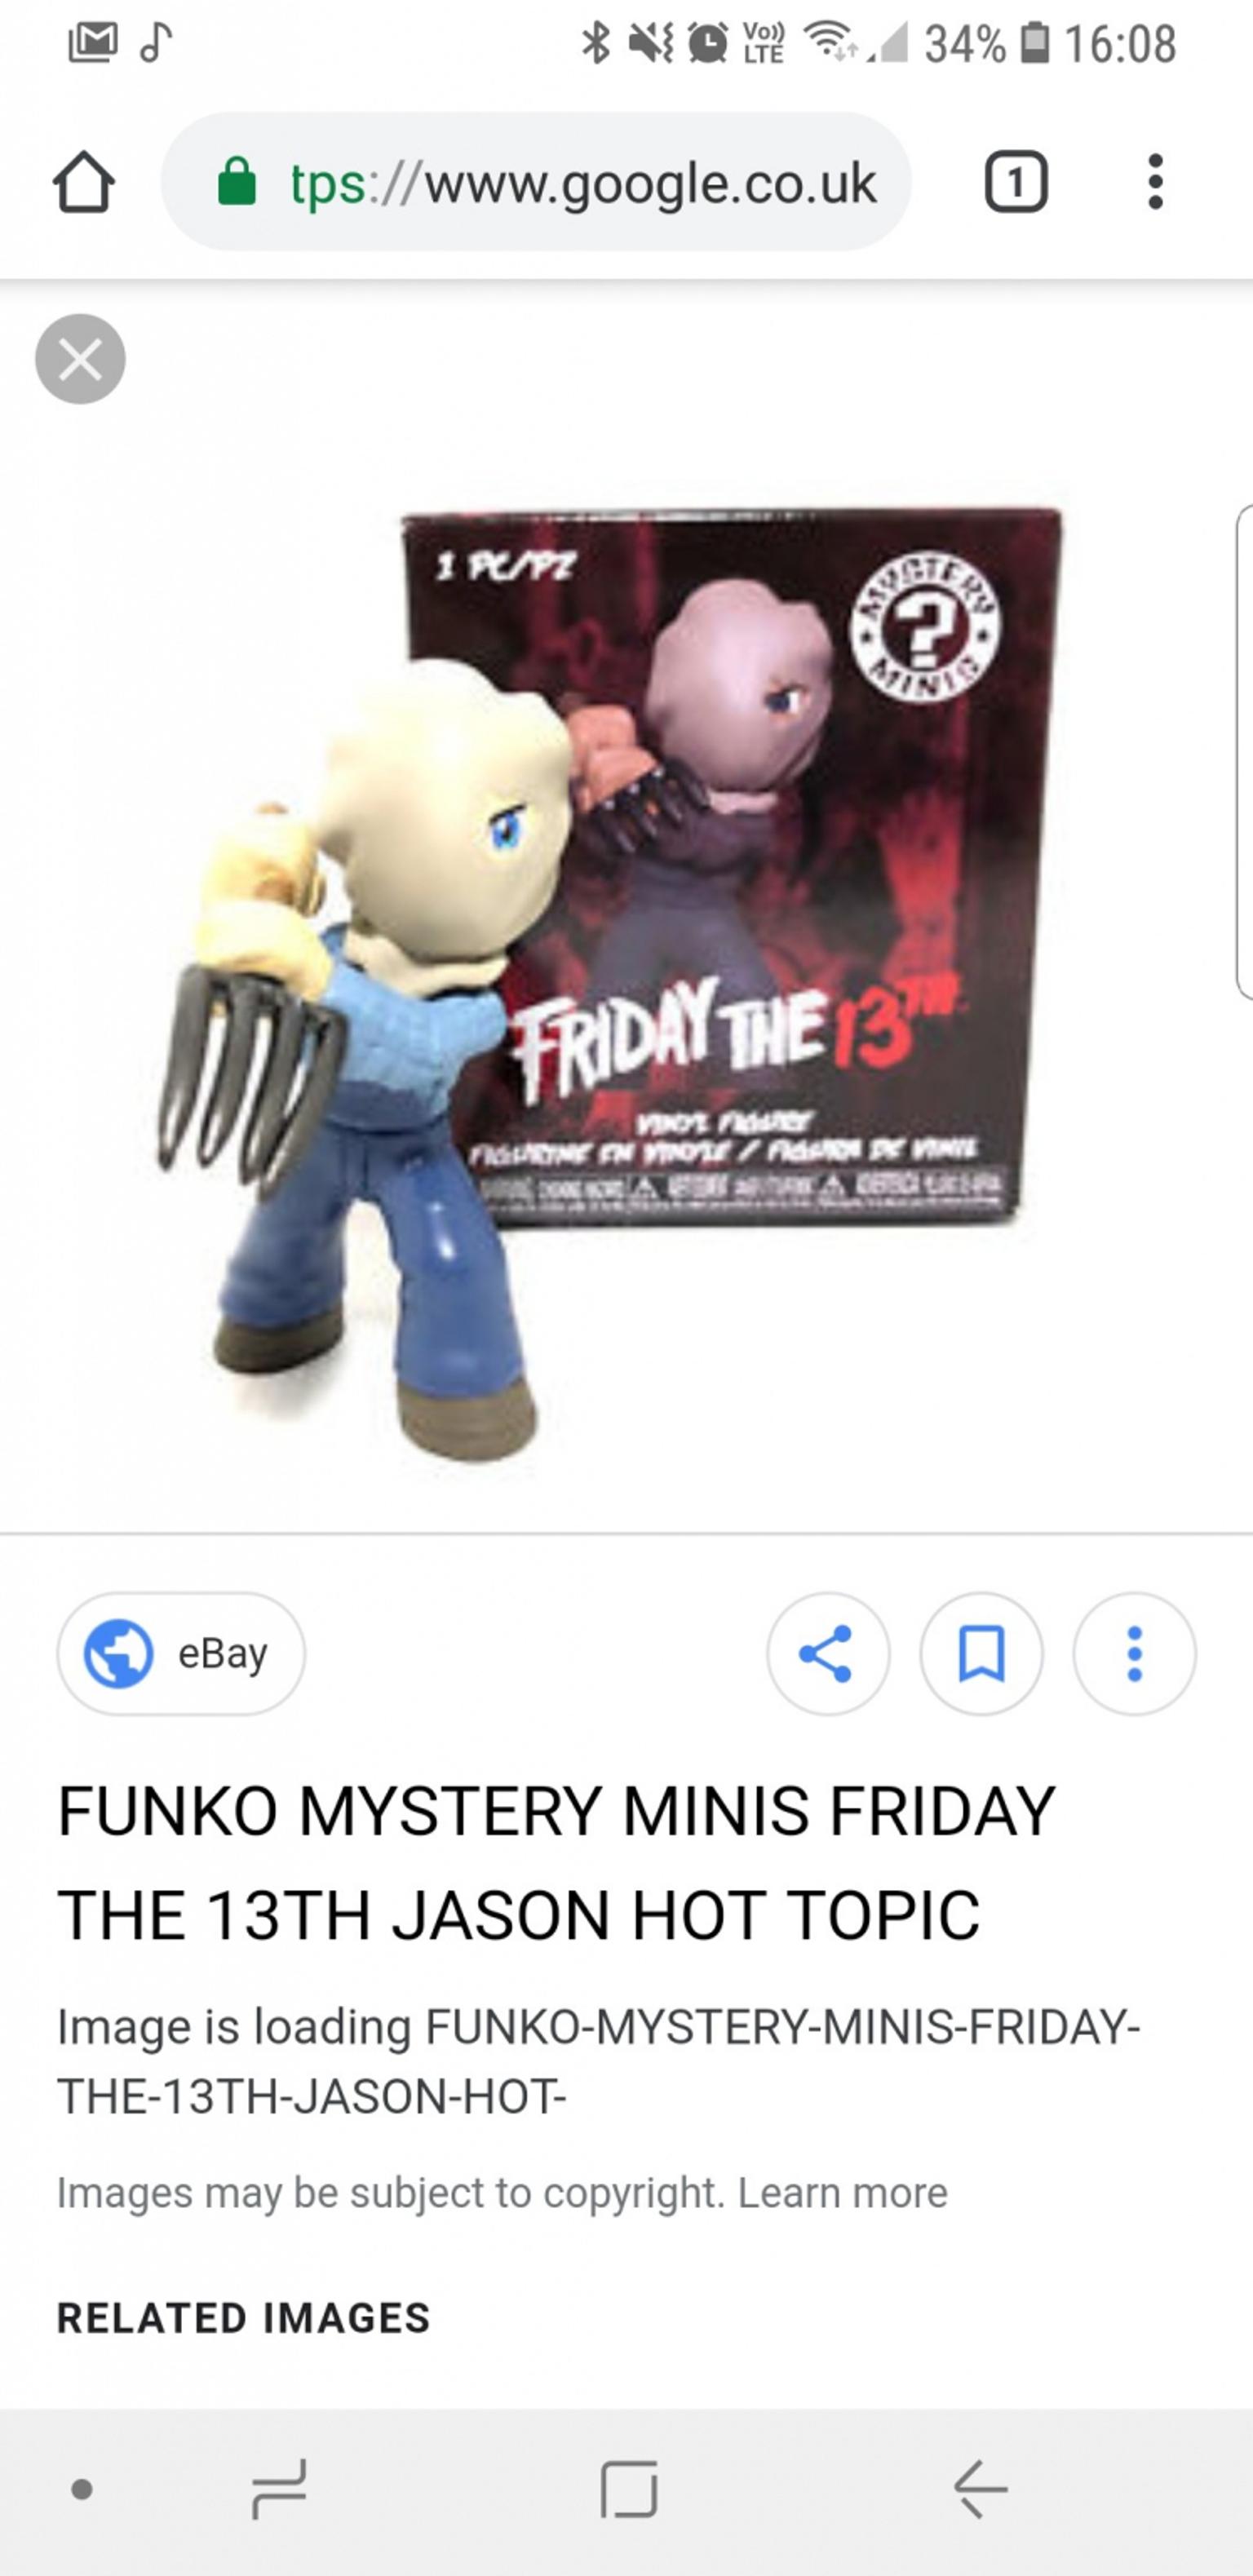 friday the 13th mystery minis